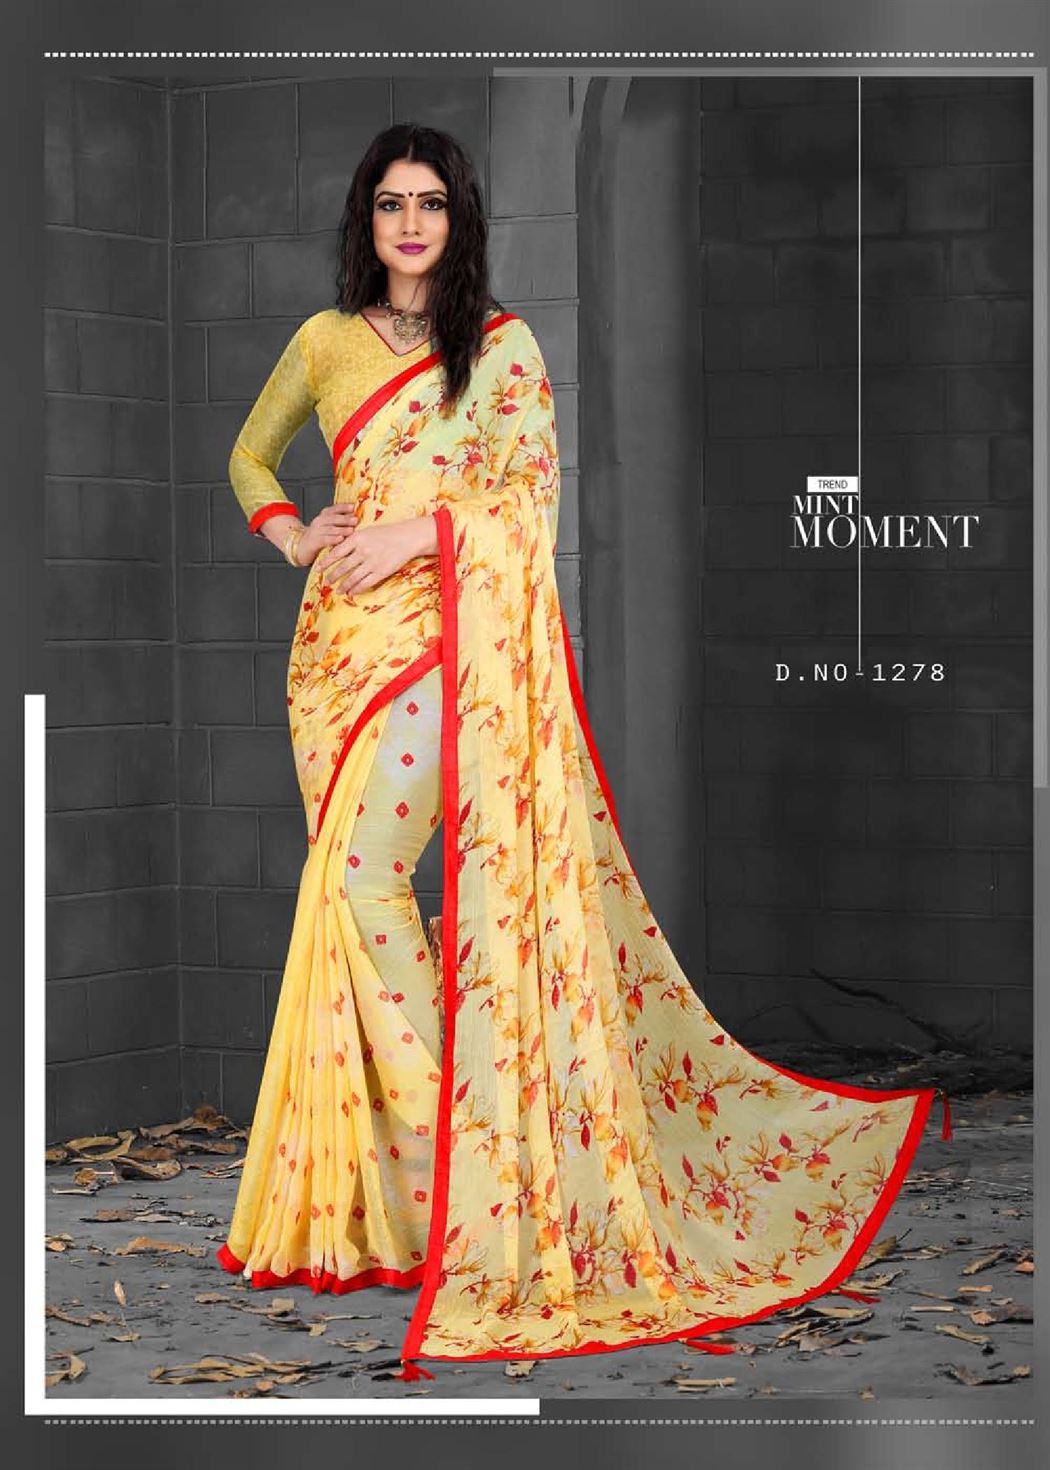 https://www.wholesaletextile.in/product-img/Nency-Weight-less-casual-wear-sarees-catalogue-21575695373.jpg